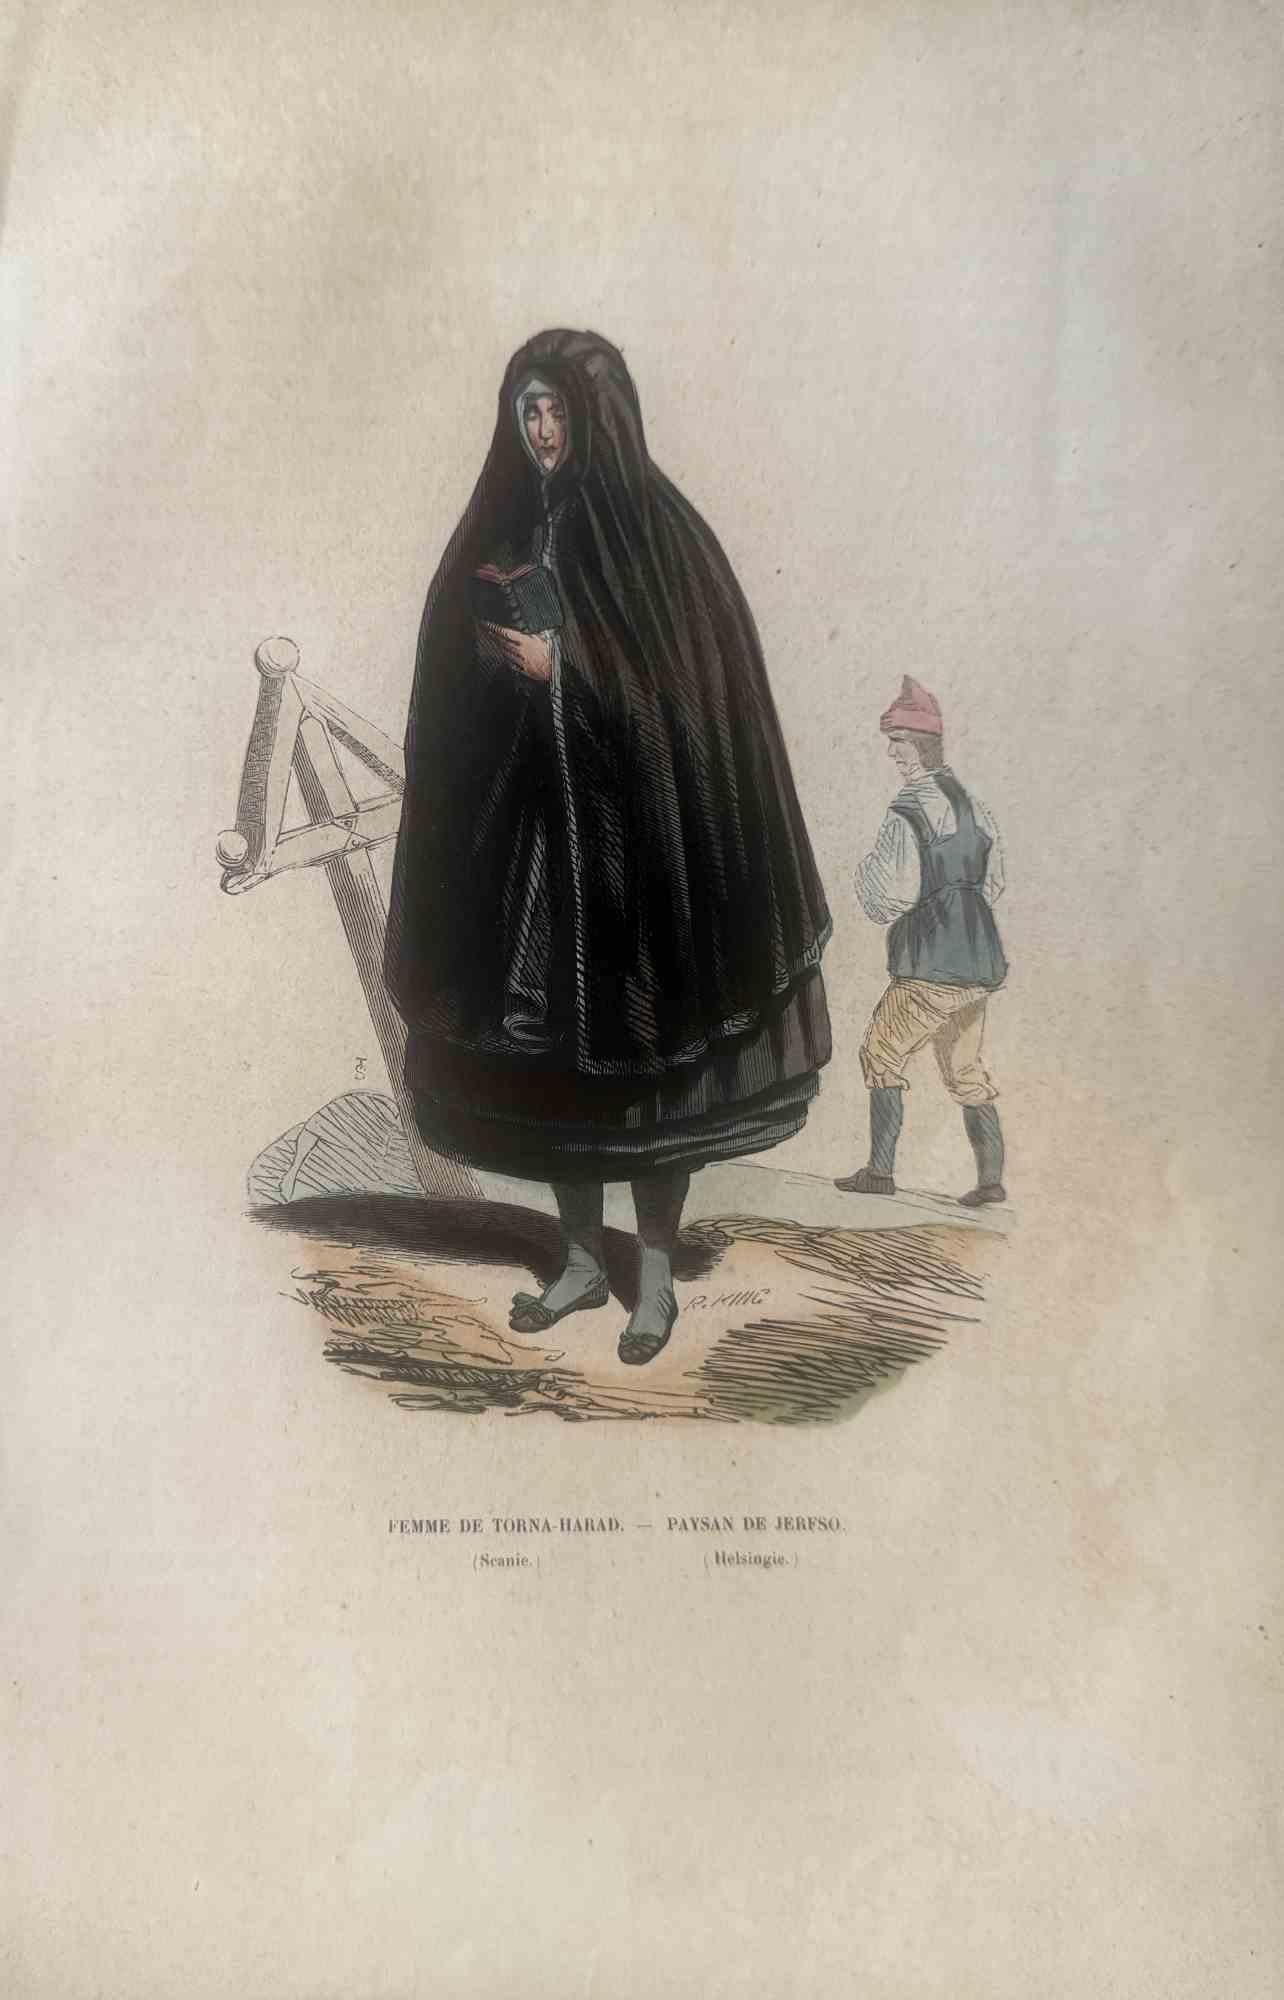 Various Artists Figurative Print – Uses and Customs – Lady of Torna-Harad – Lithographie – 1862